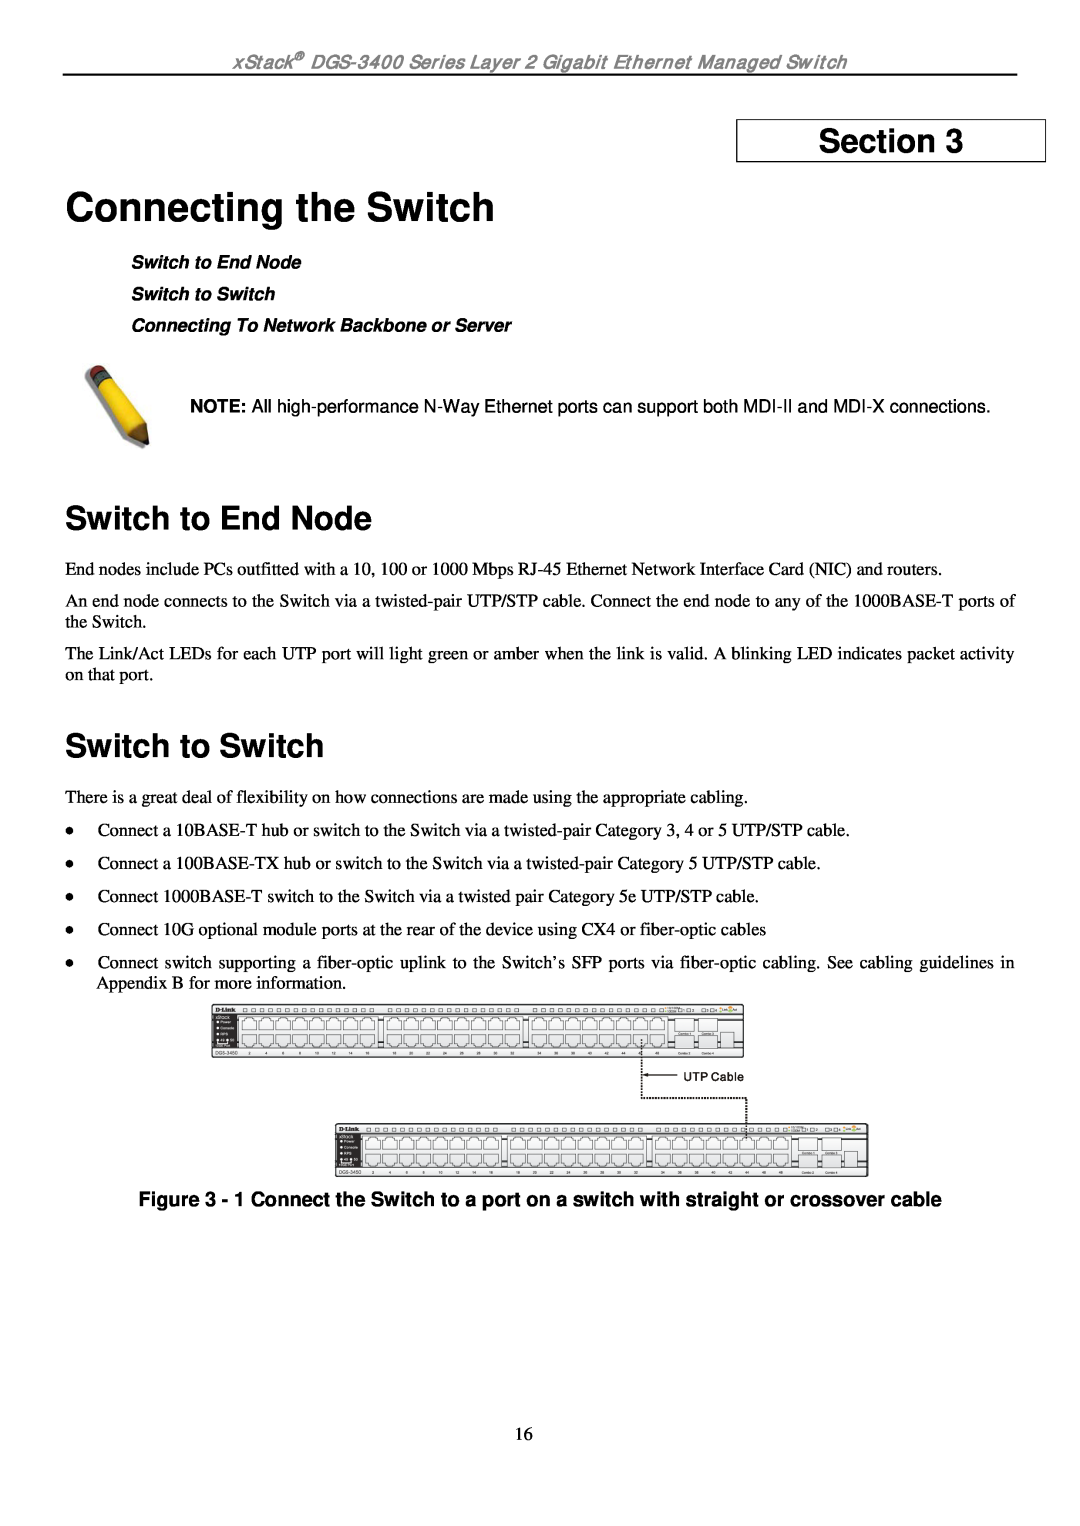 D-Link ethernet managed switch manual Connecting the Switch, Switch to End Node, Switch to Switch, Section 